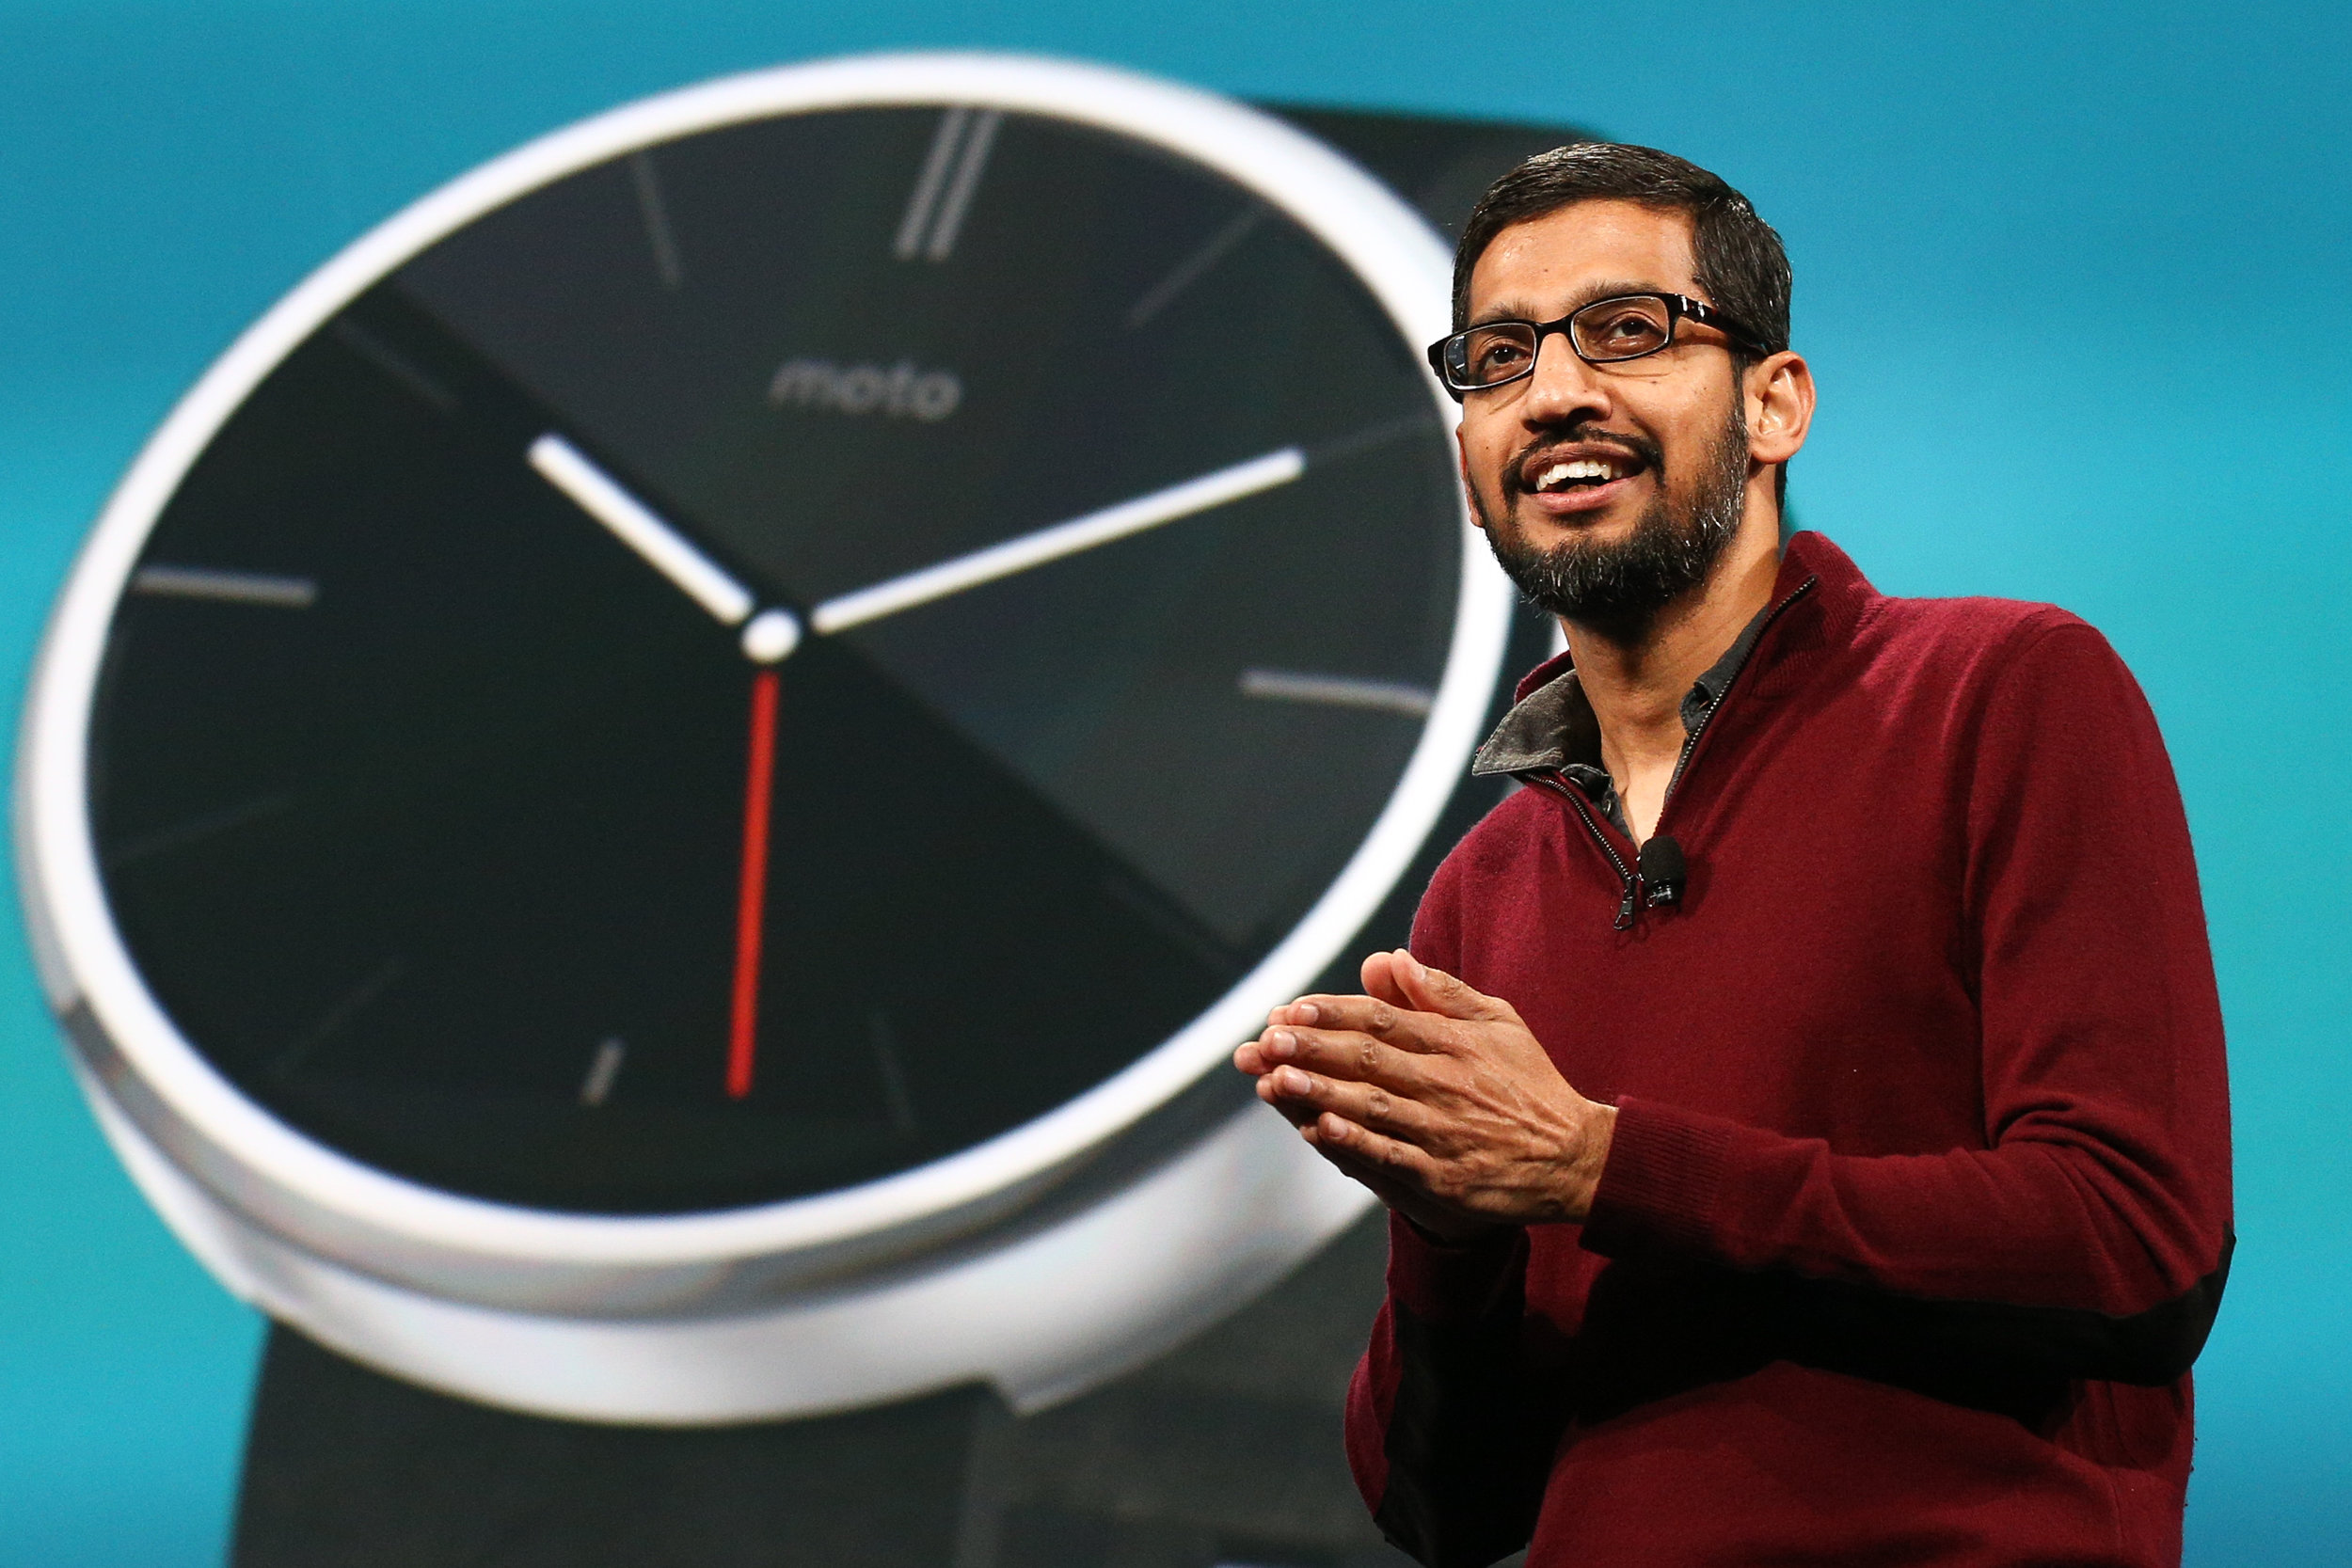  Sundar Pichai, Chief Executive Officer of Google Inc., speaks during the keynote at the Google I/O developers conference in San Francisco, California 